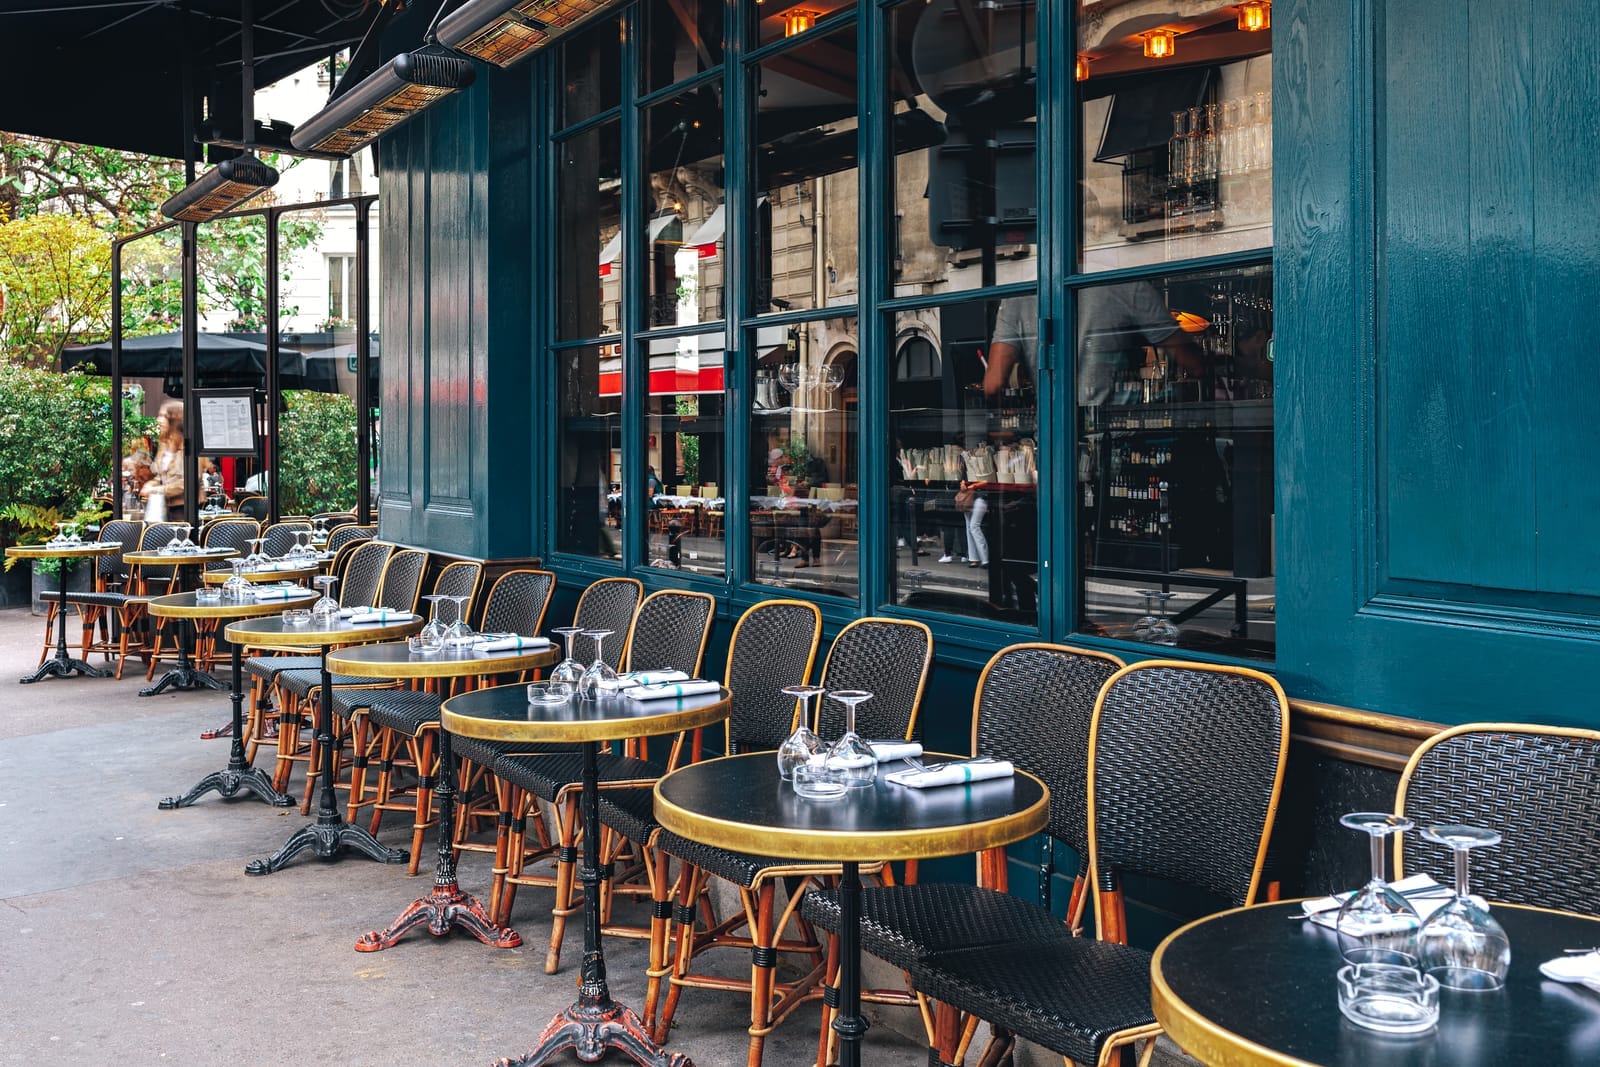 Restaurant table seating in France or Europe with glasses and prix fixe dinner menu options